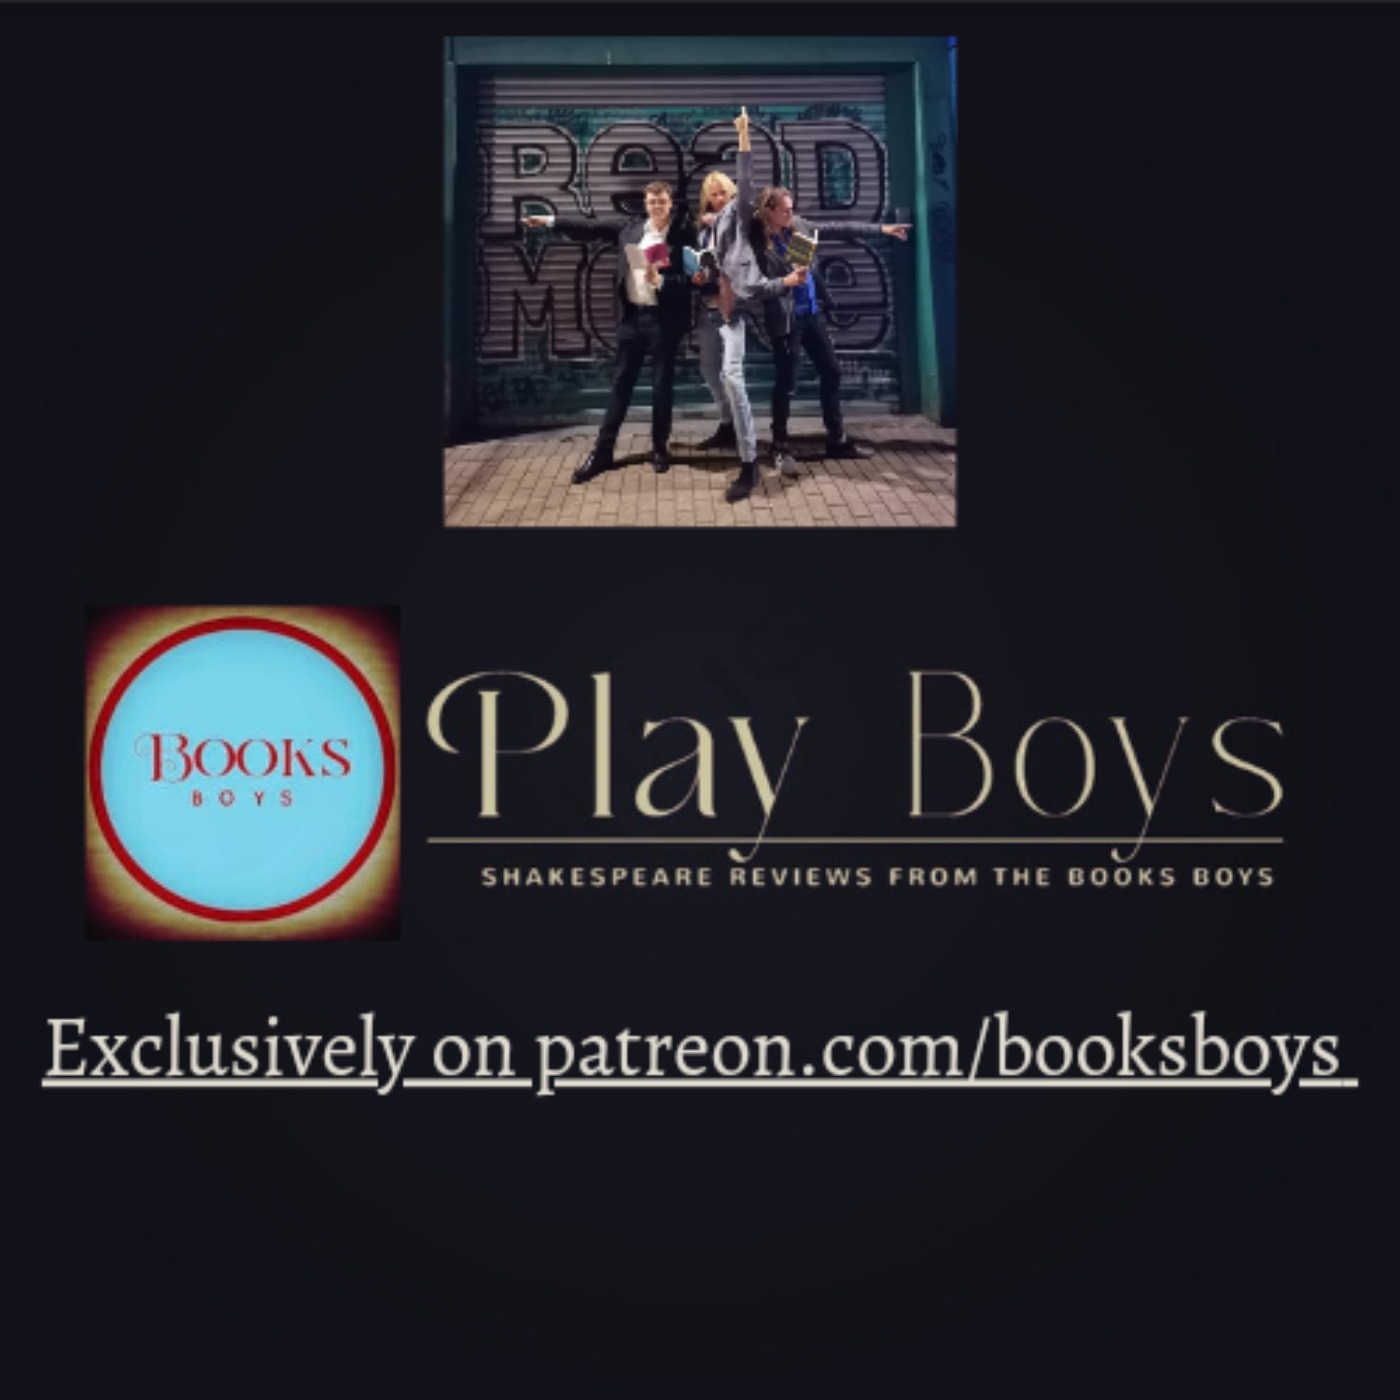 PlayBoys Episode 4: As You Like It